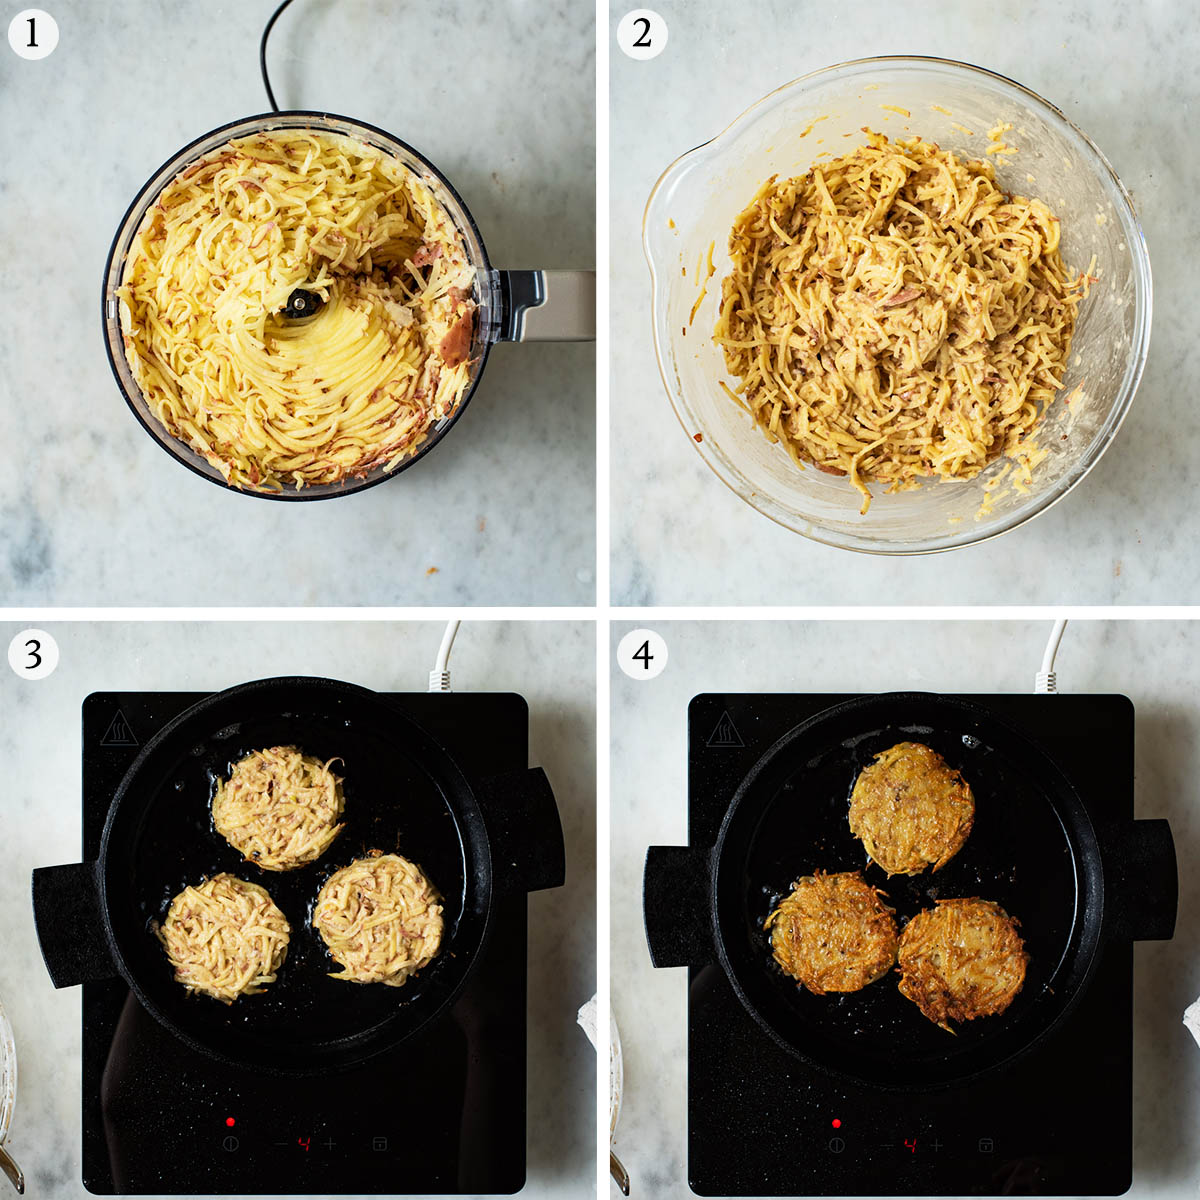 Kartoffelpuffer steps 1 to 4, mixing the batter and before and after cooking in a frying pan.